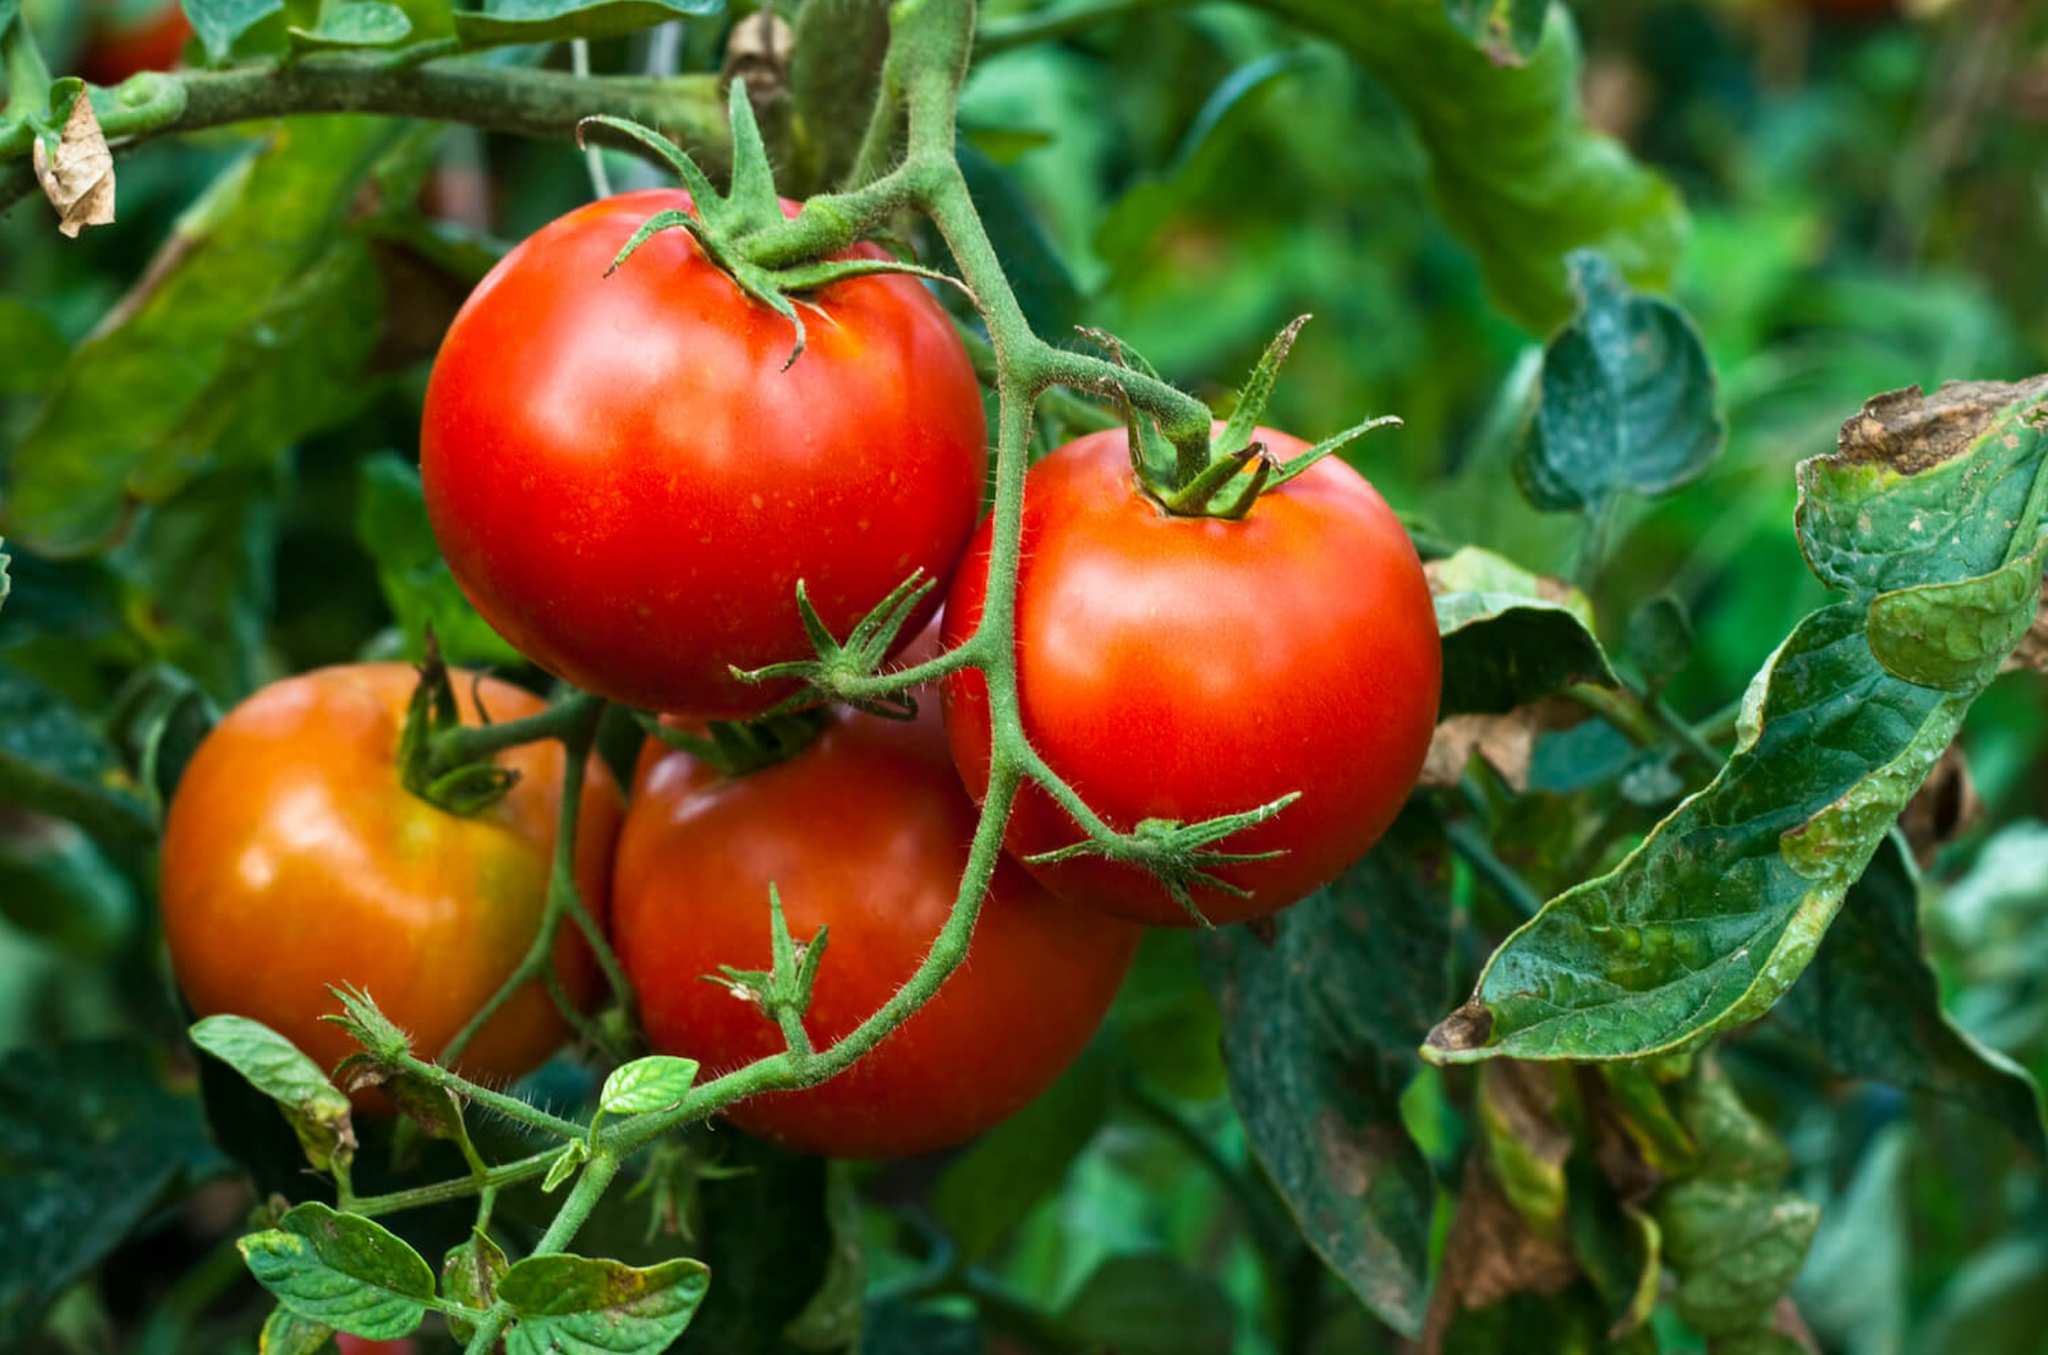 Image shows healthy tomatoes in a garden.